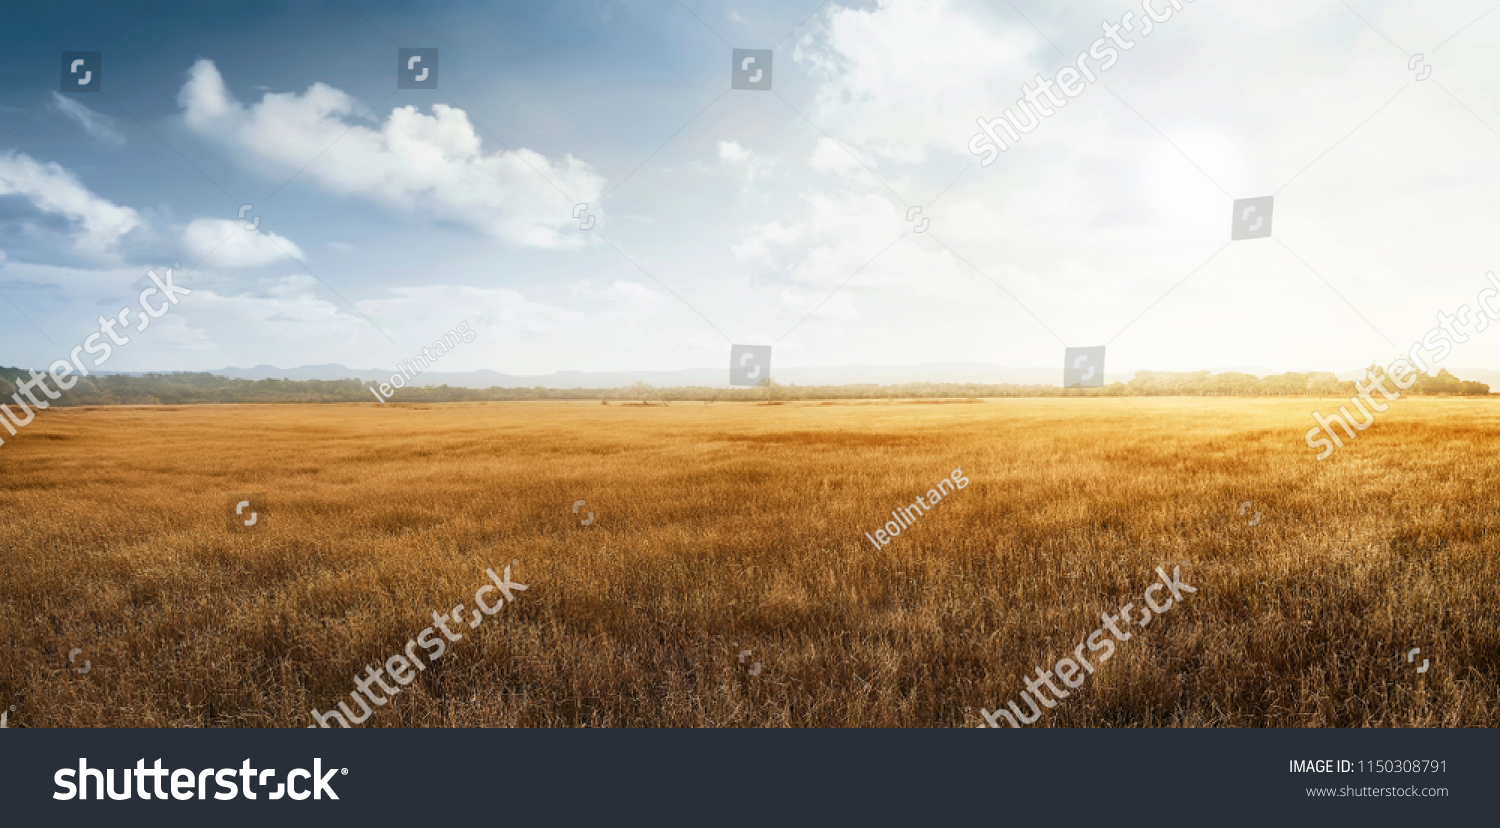 Landscape view of dry savanna with blue sky background #1150308791